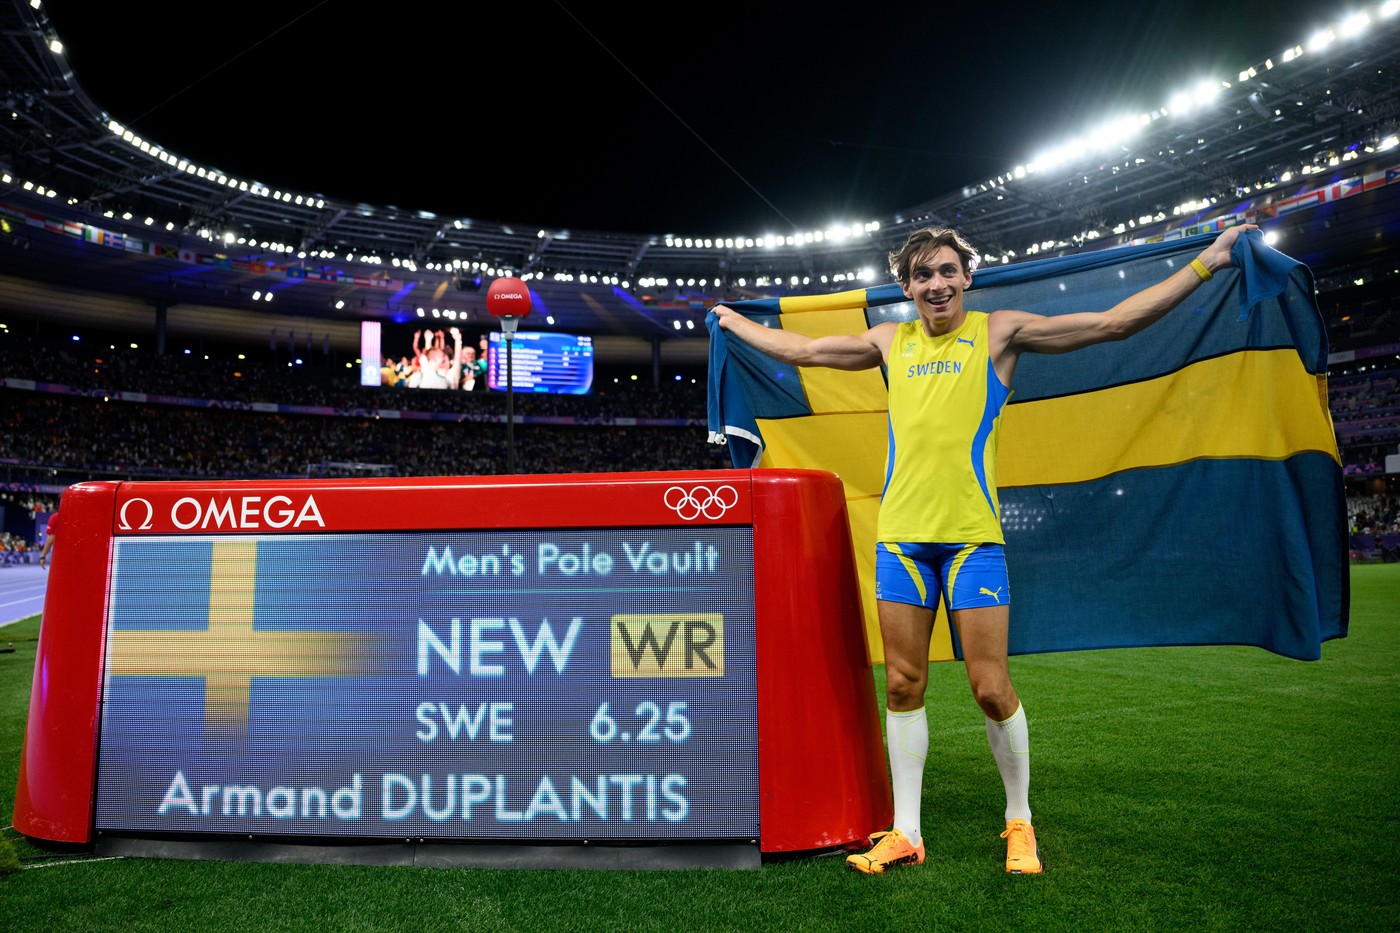 Armand Duplantis of Sweden celebrates with his family after clearing 6,25 meters in men's athletics pole vault final and setting a new world record during day 10 of the Paris 2024 Olympic Games on August 5, 2024 in Paris.
Paris 2024 Olympics, Day 10, Athletics, France - 05 Aug 2024,Image: 896313417, License: Rights-managed, Restrictions: , Model Release: no